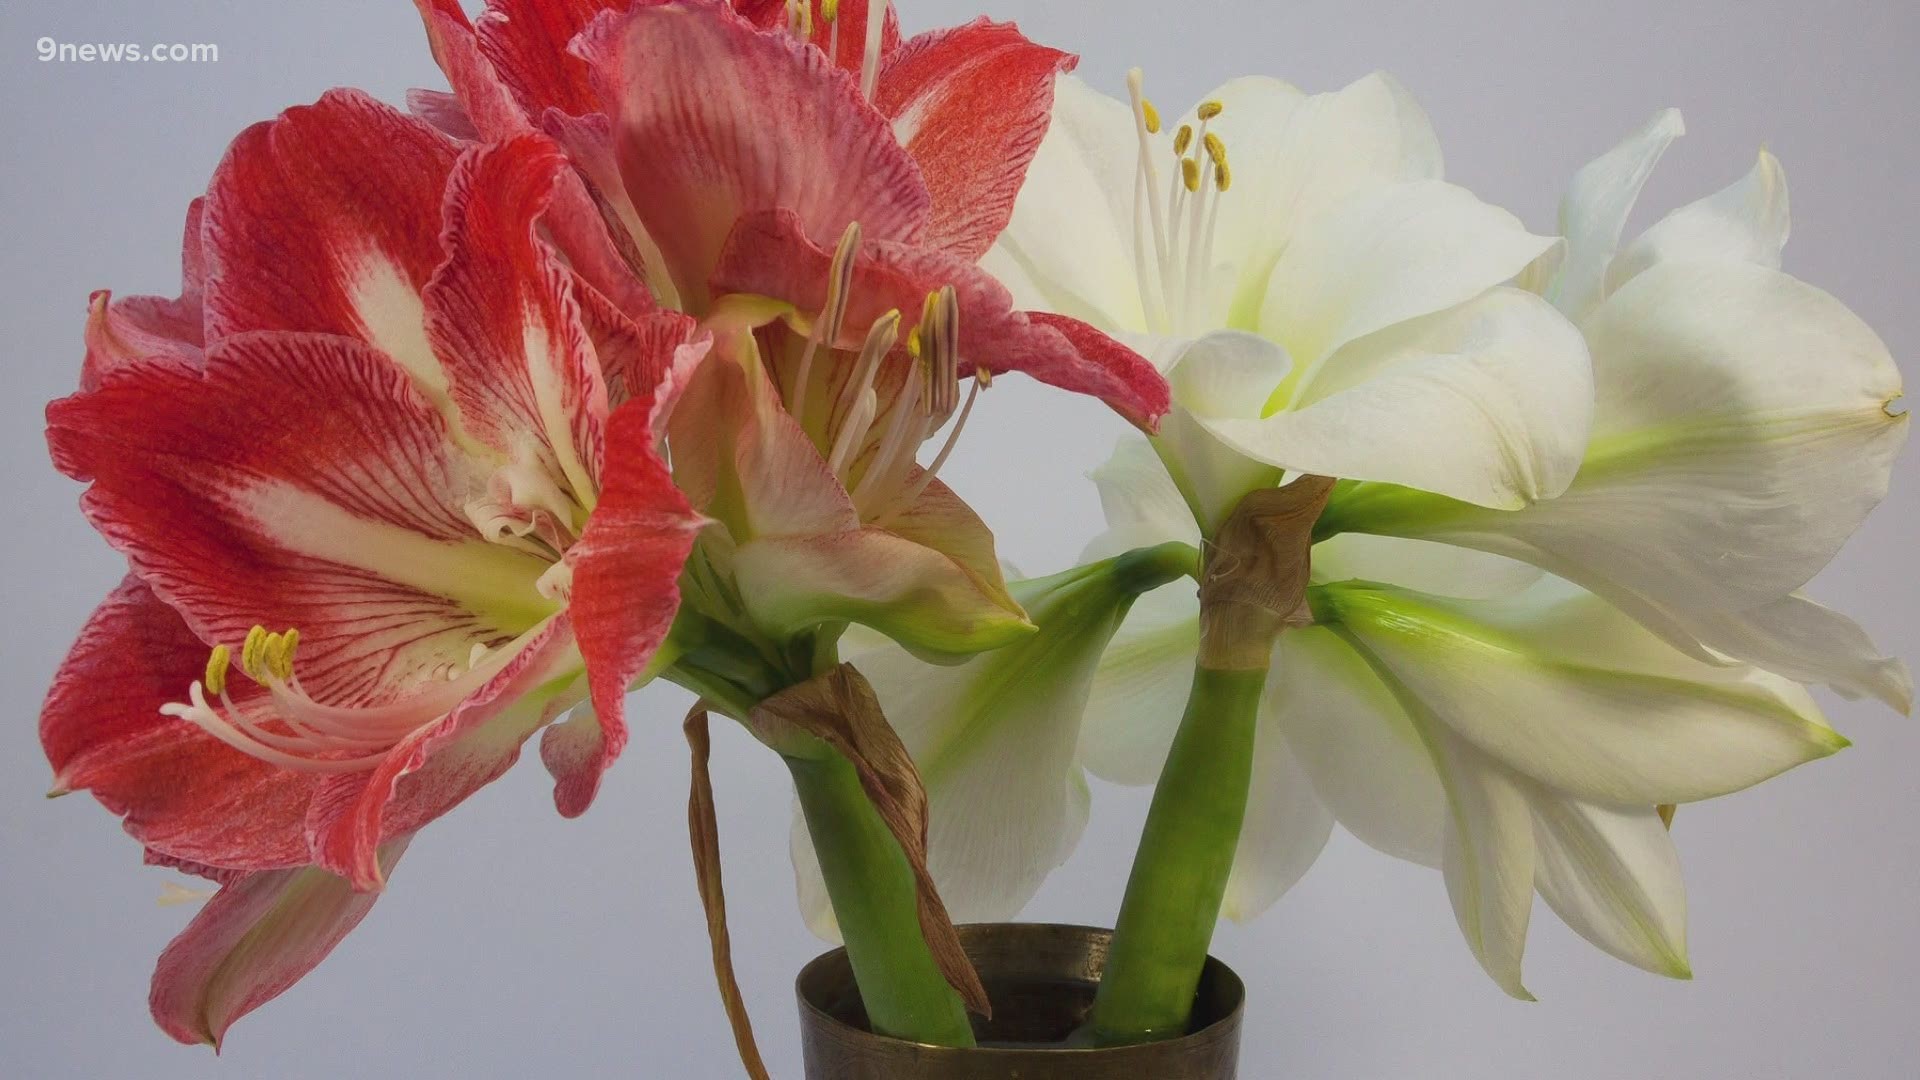 Amaryllis and paperwhites provide a pop of color and a fresh scent to chase away the winter blues.